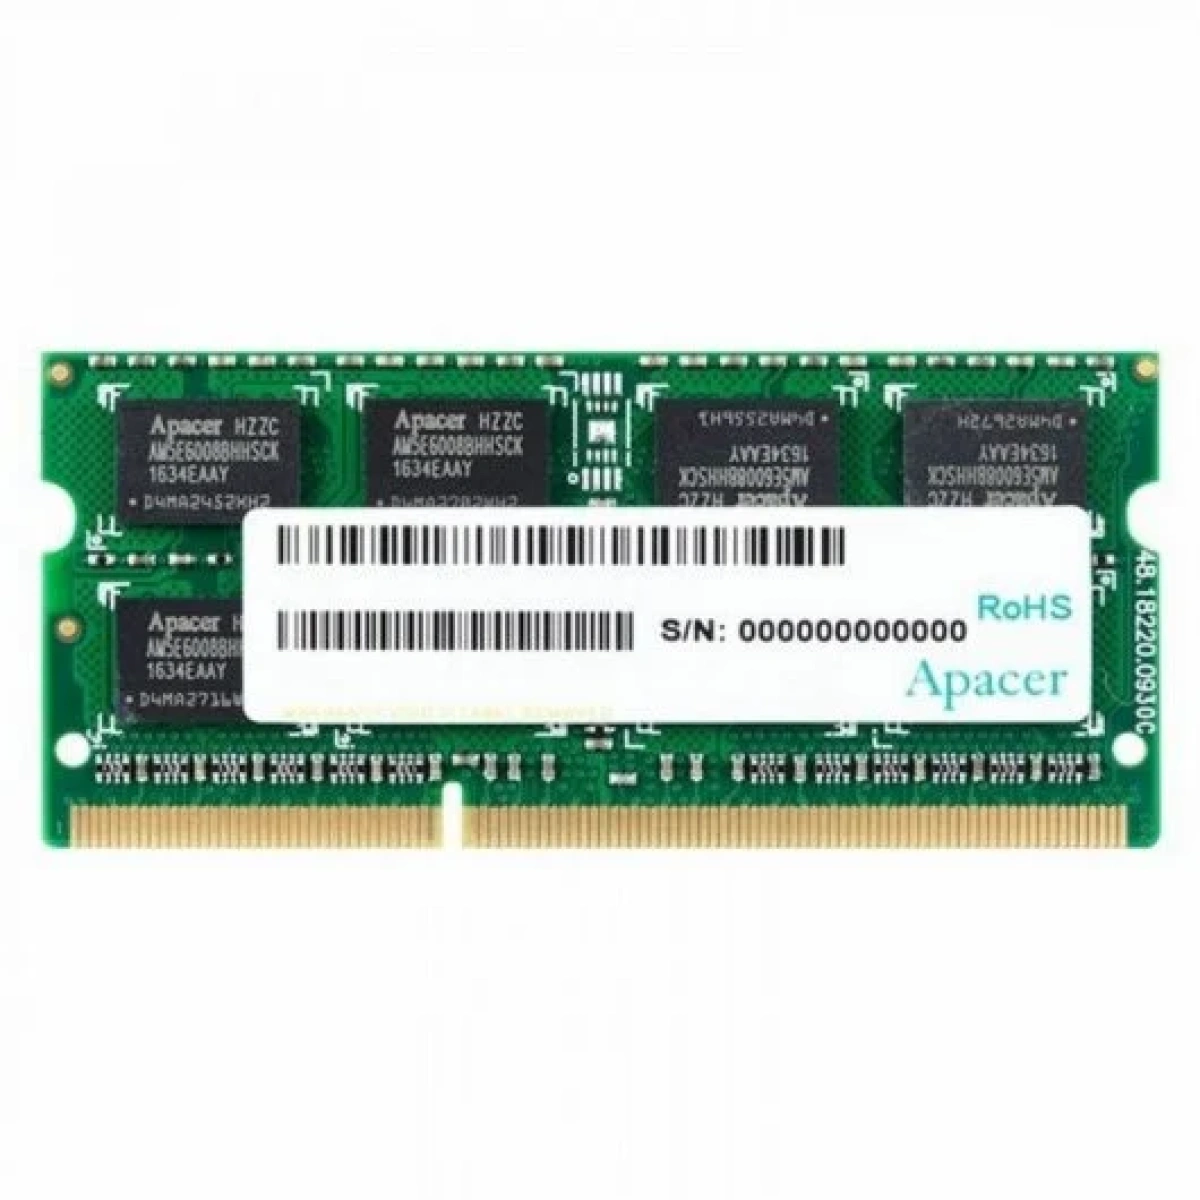 1269 apacer ddr3l so dimm 1600mhz pc3 12800 8gb cl11